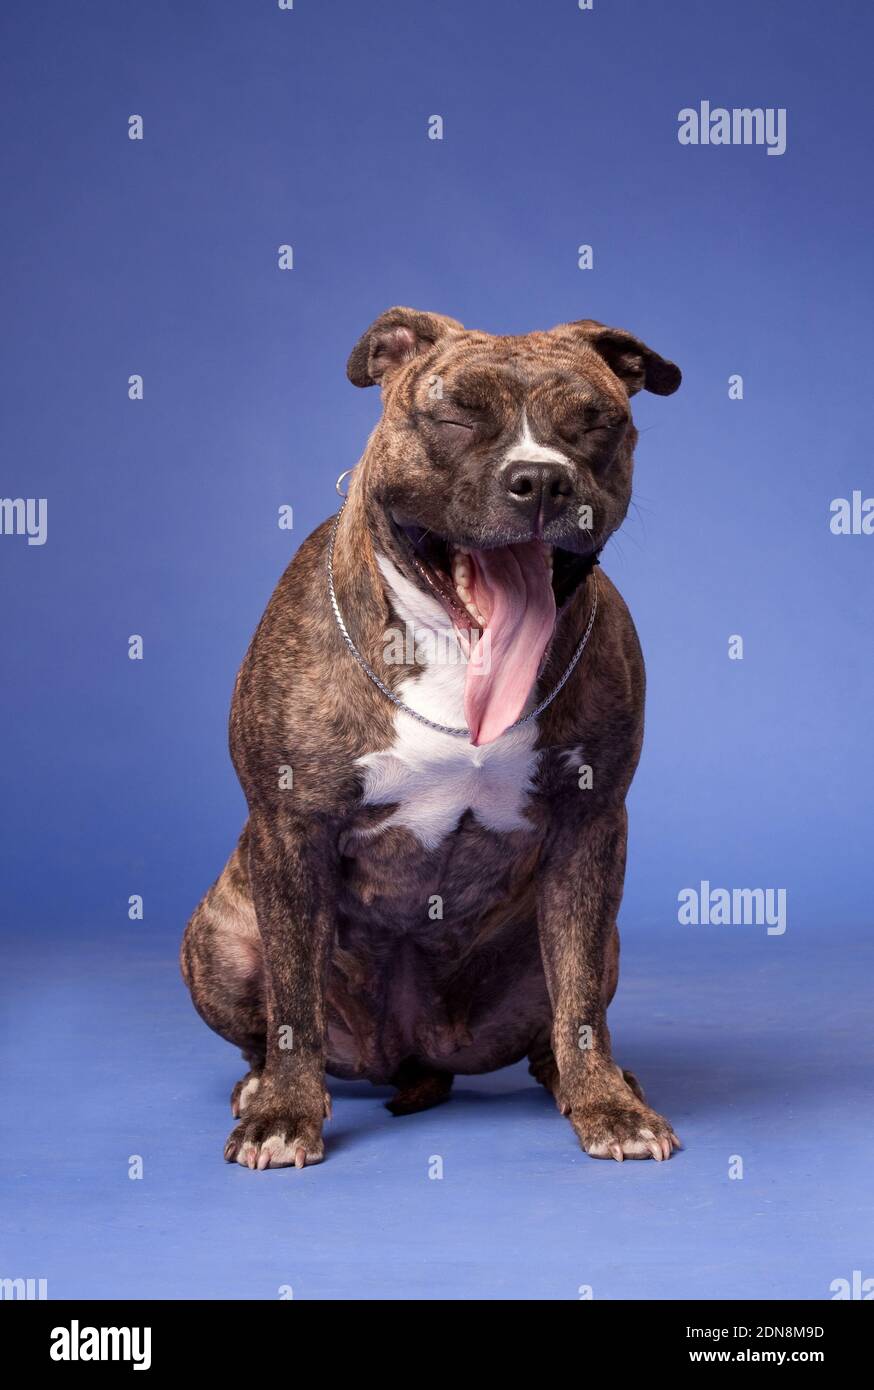 Tiger with white color dog breed American Staffordshire Terrier, yawns funny in the studio indoors, on a blue background Stock Photo